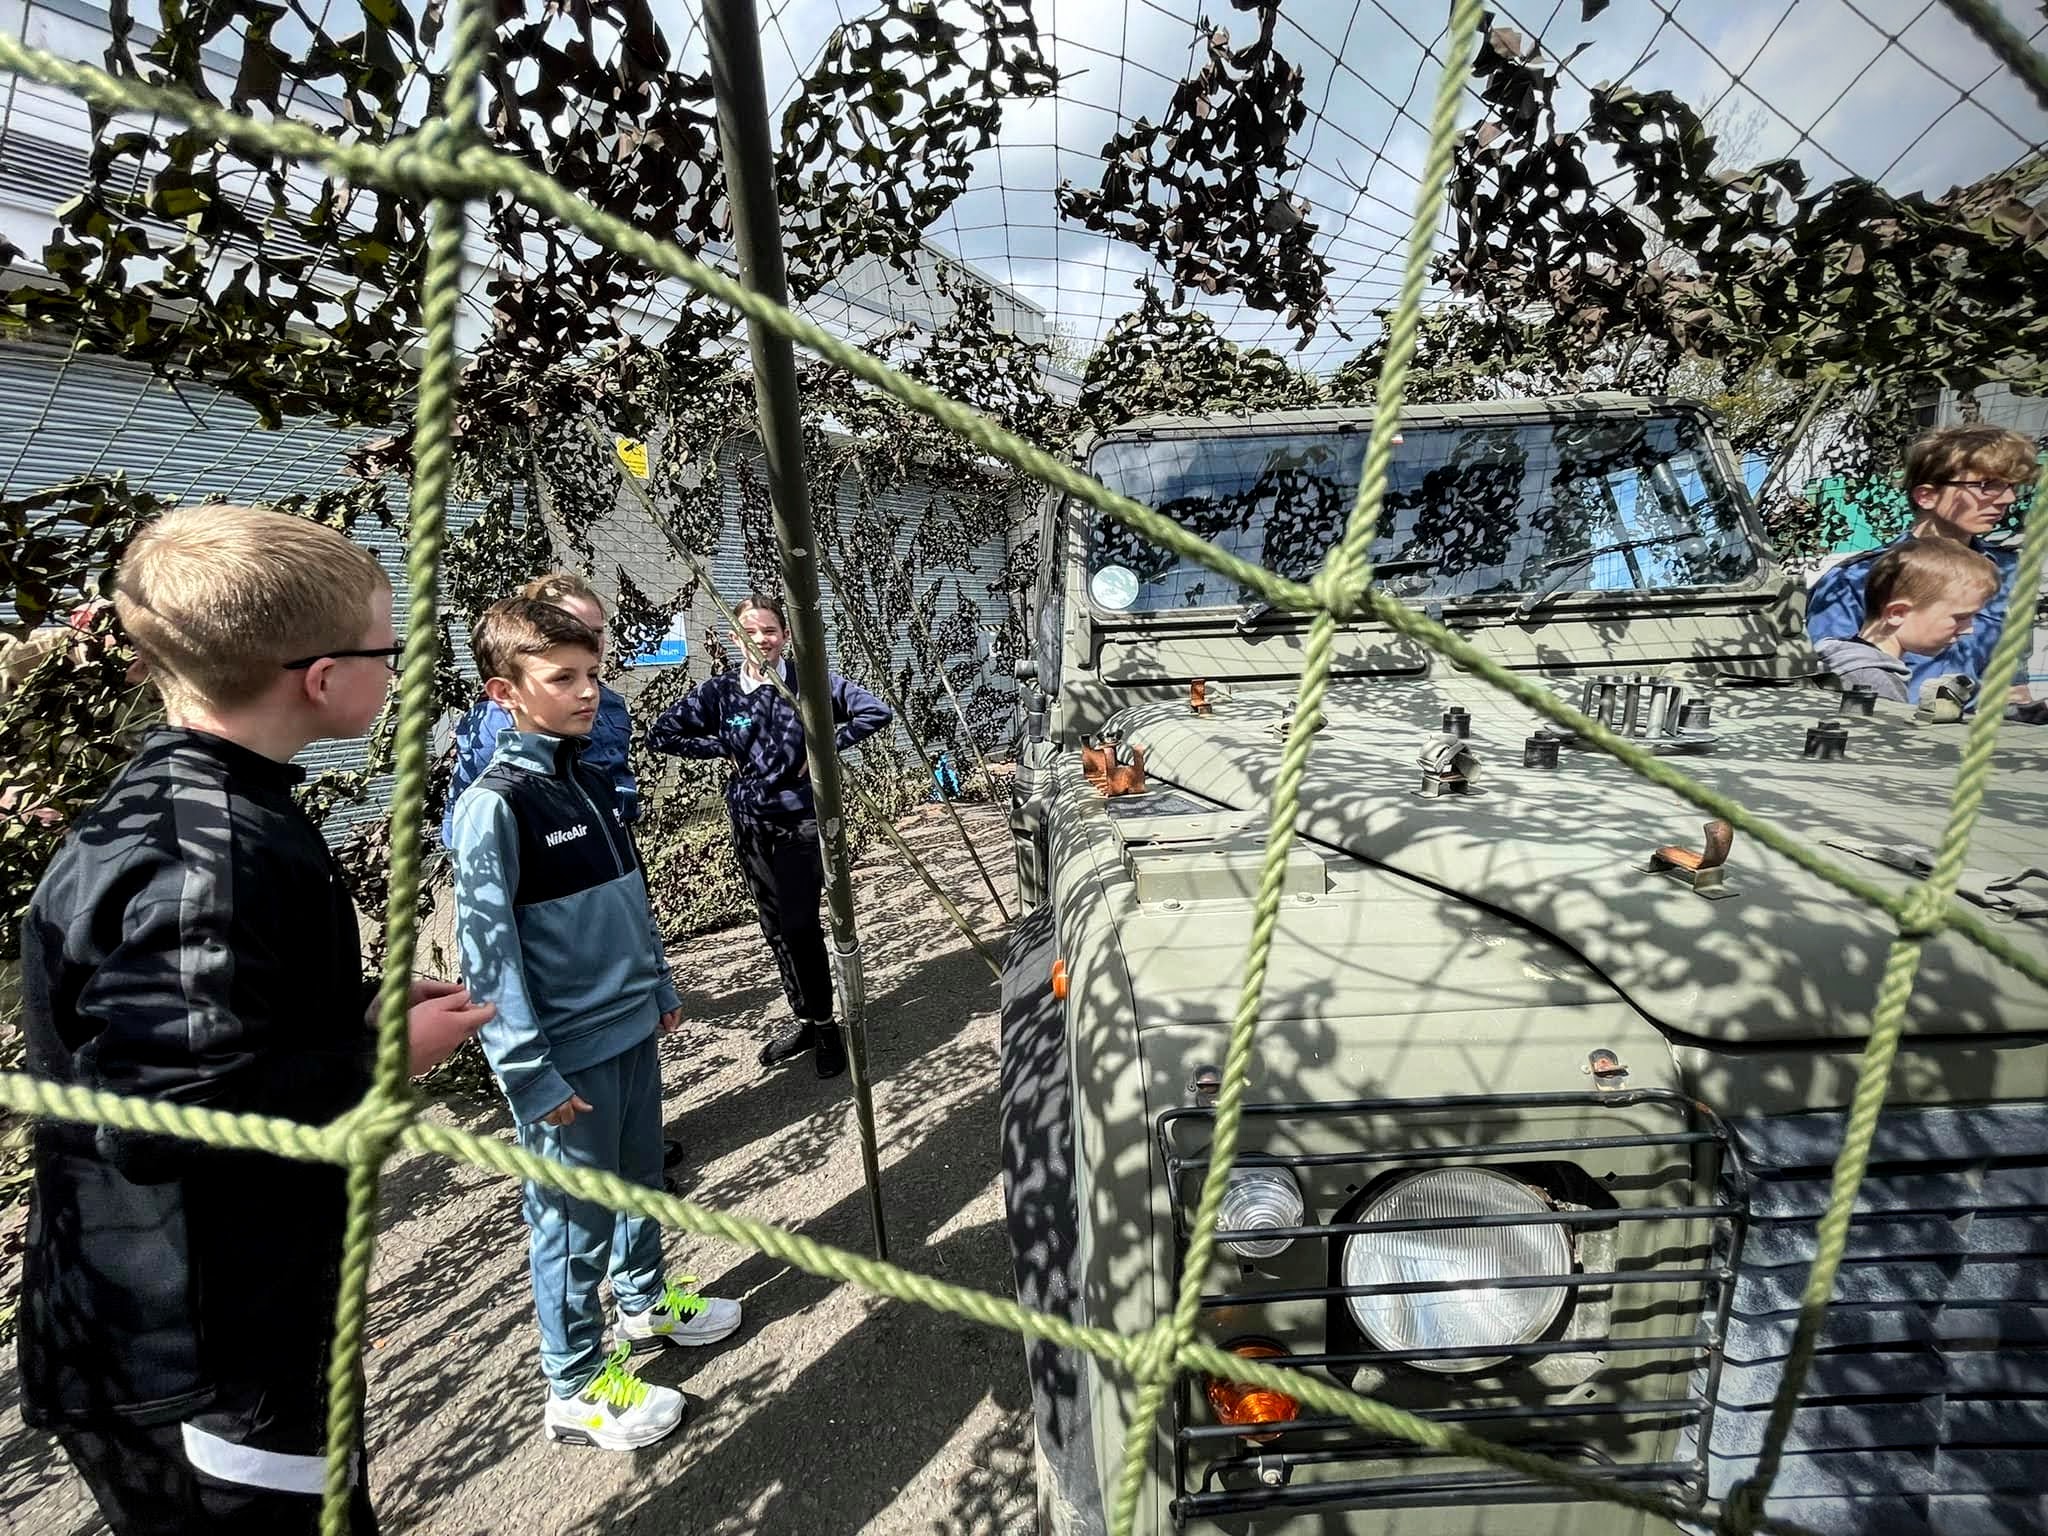 Sea Cadets look at vehicle in netting